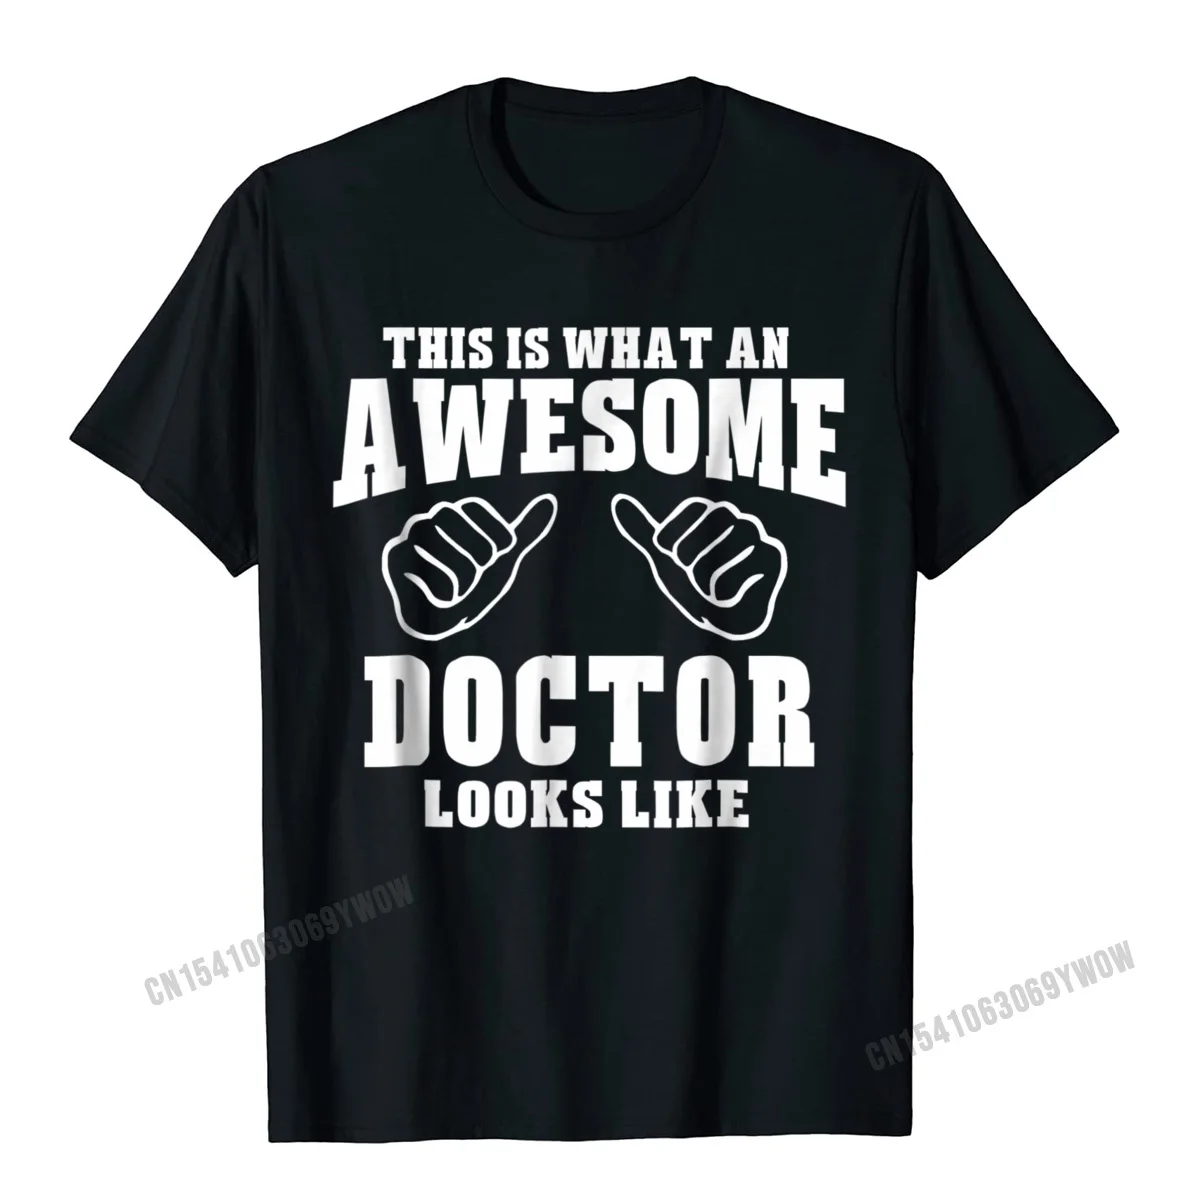 

This Is What Awesome Doctor Looks Like- Unisex T-Shirt Camisas Men Designer Funny T Shirts Cotton Male Tops T Shirt Crazy